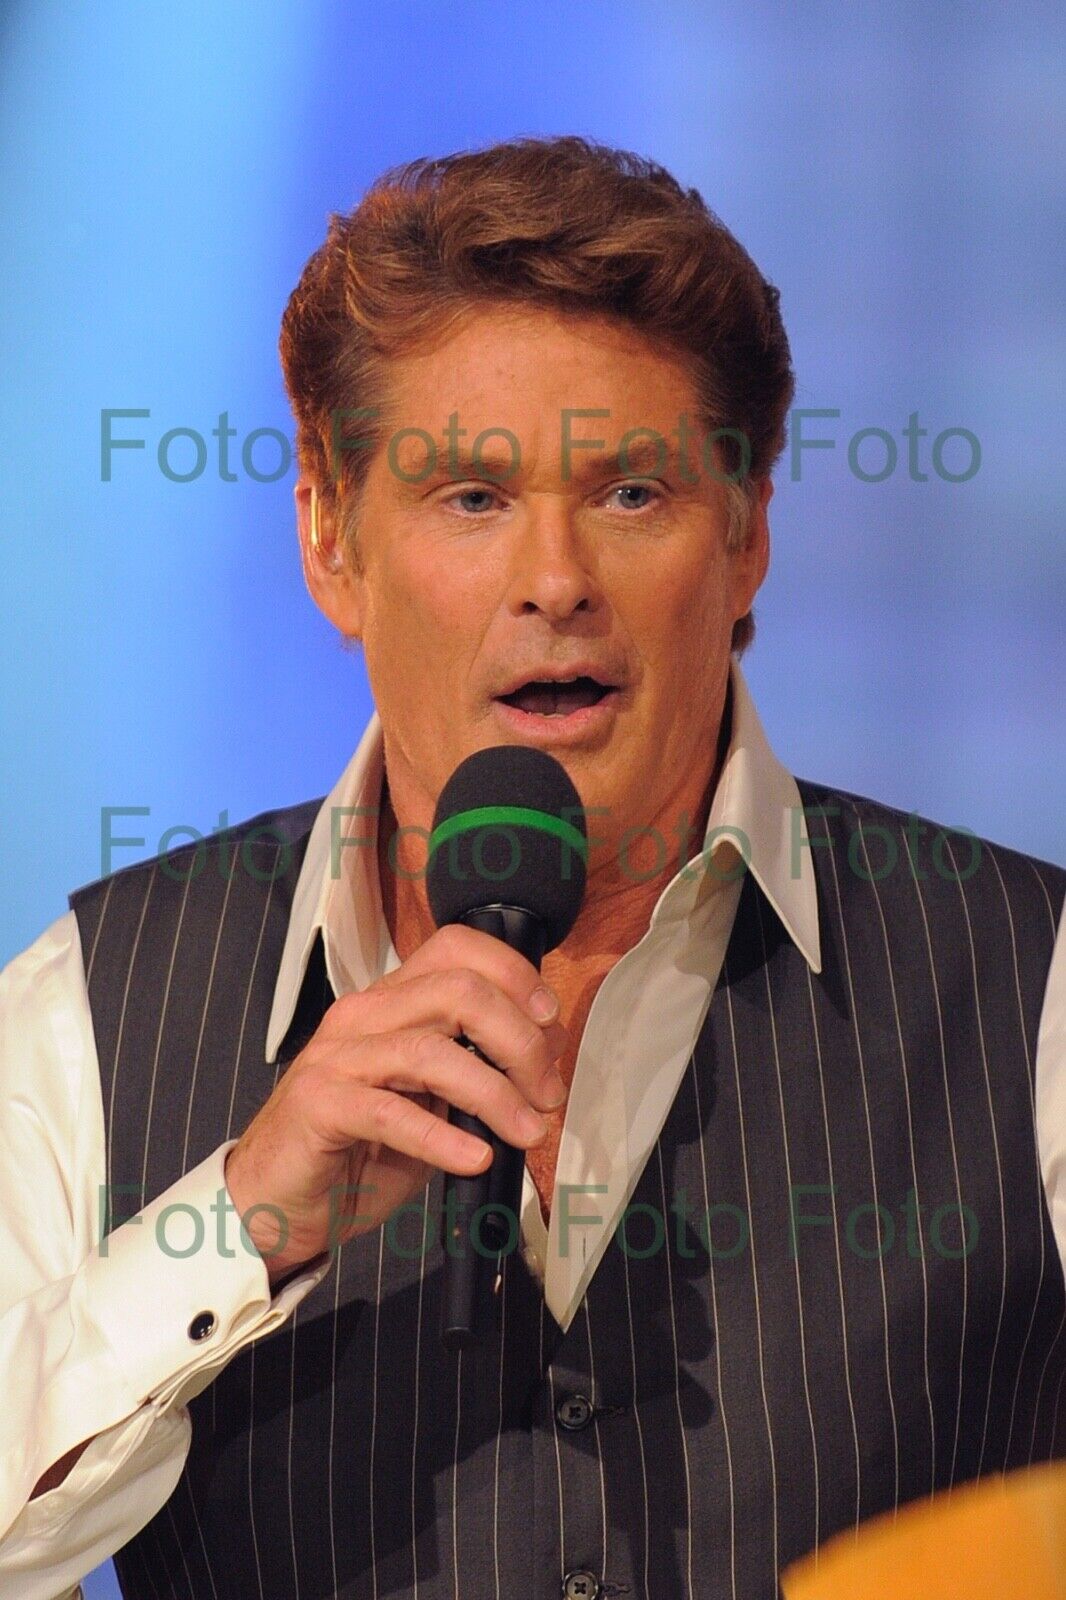 David Hasselhoff Music Film TV Photo Poster painting 20 X 30 CM Without Autograph (Be-17